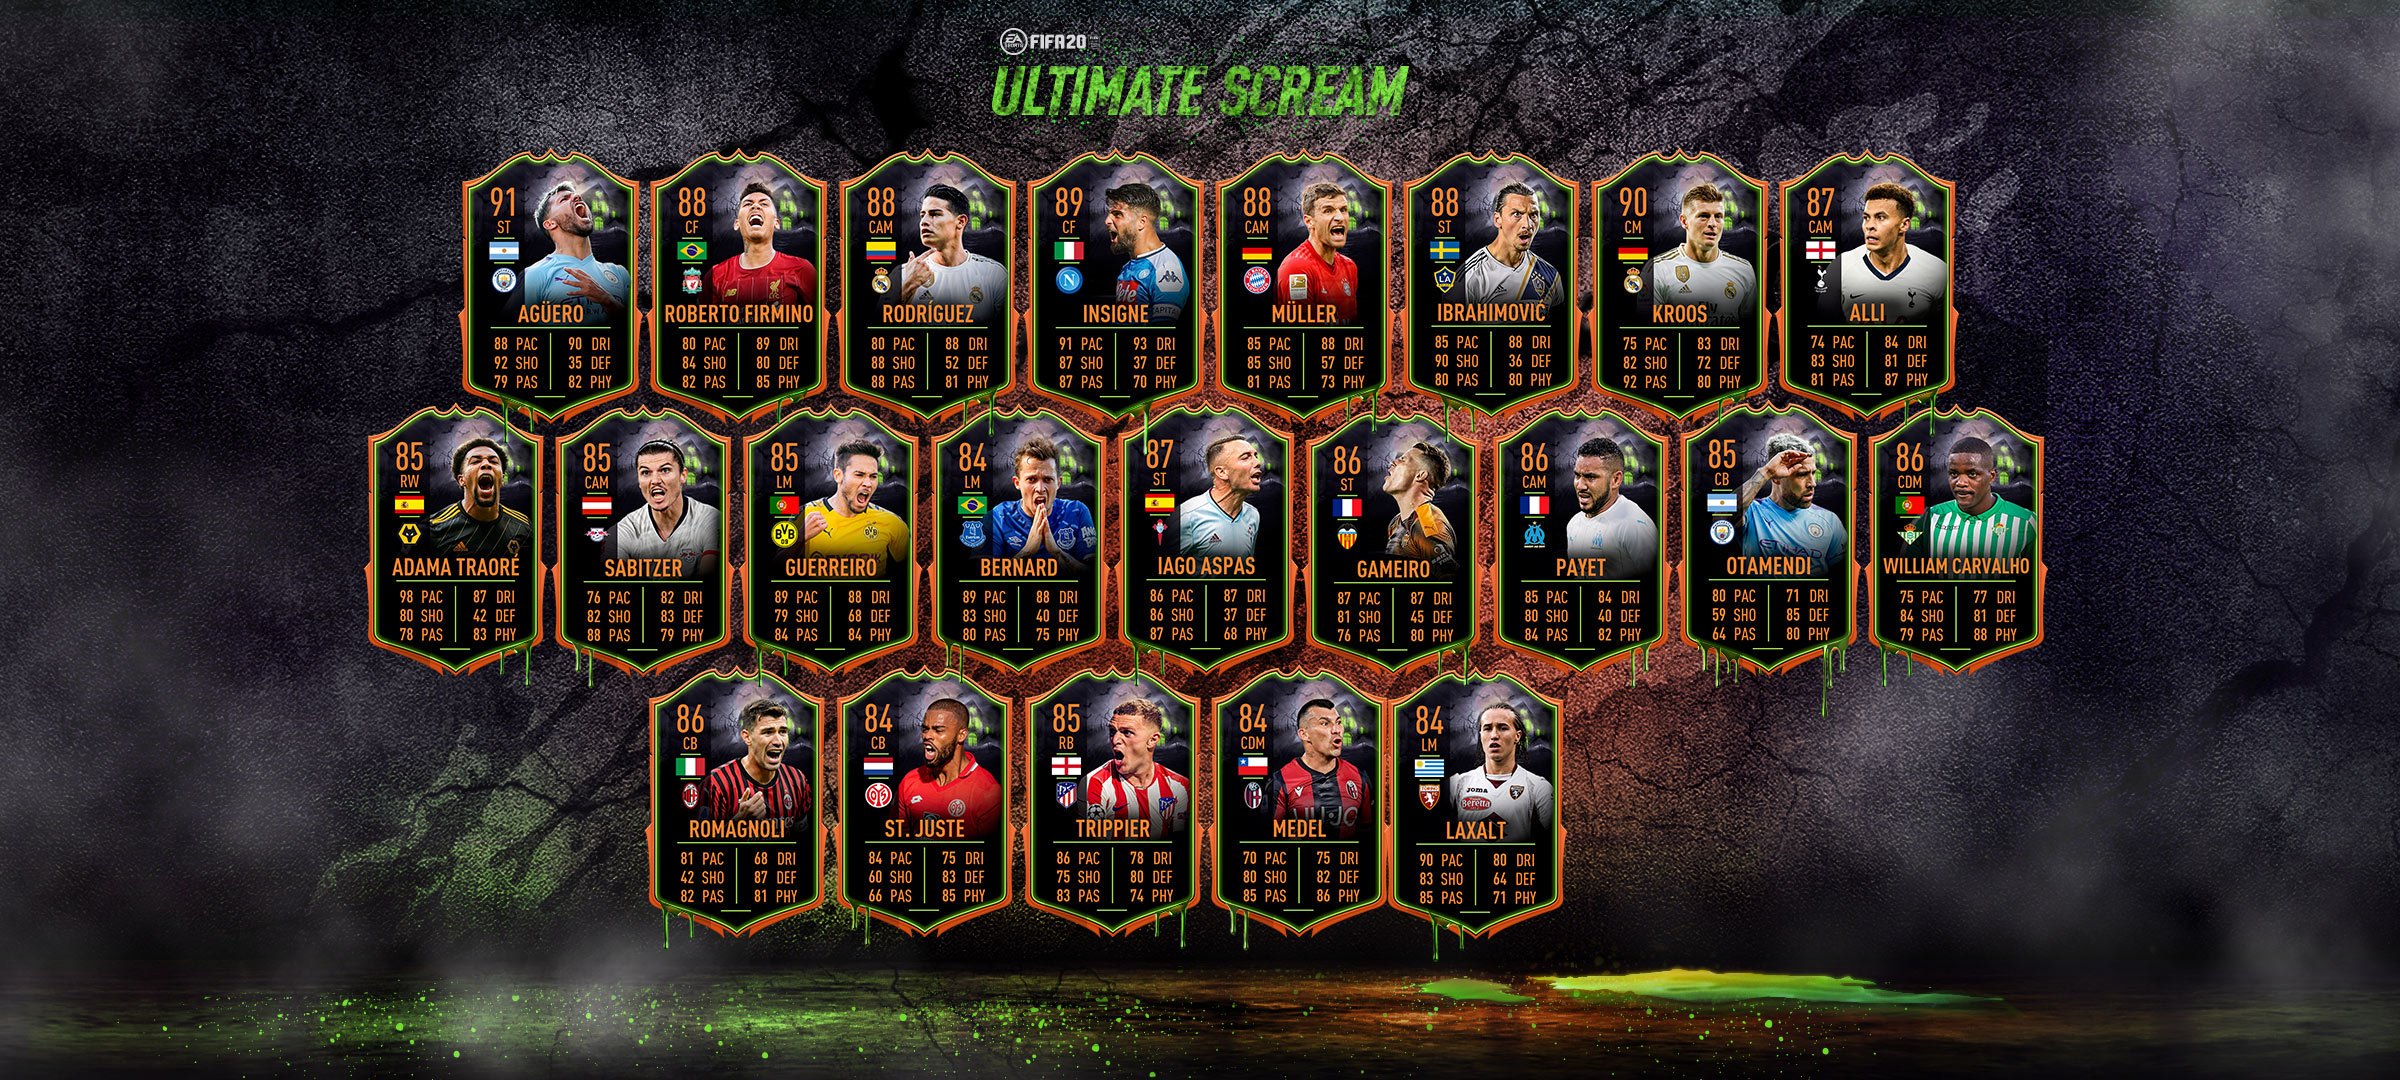 fifa 20 ultimate scream all players available in packs